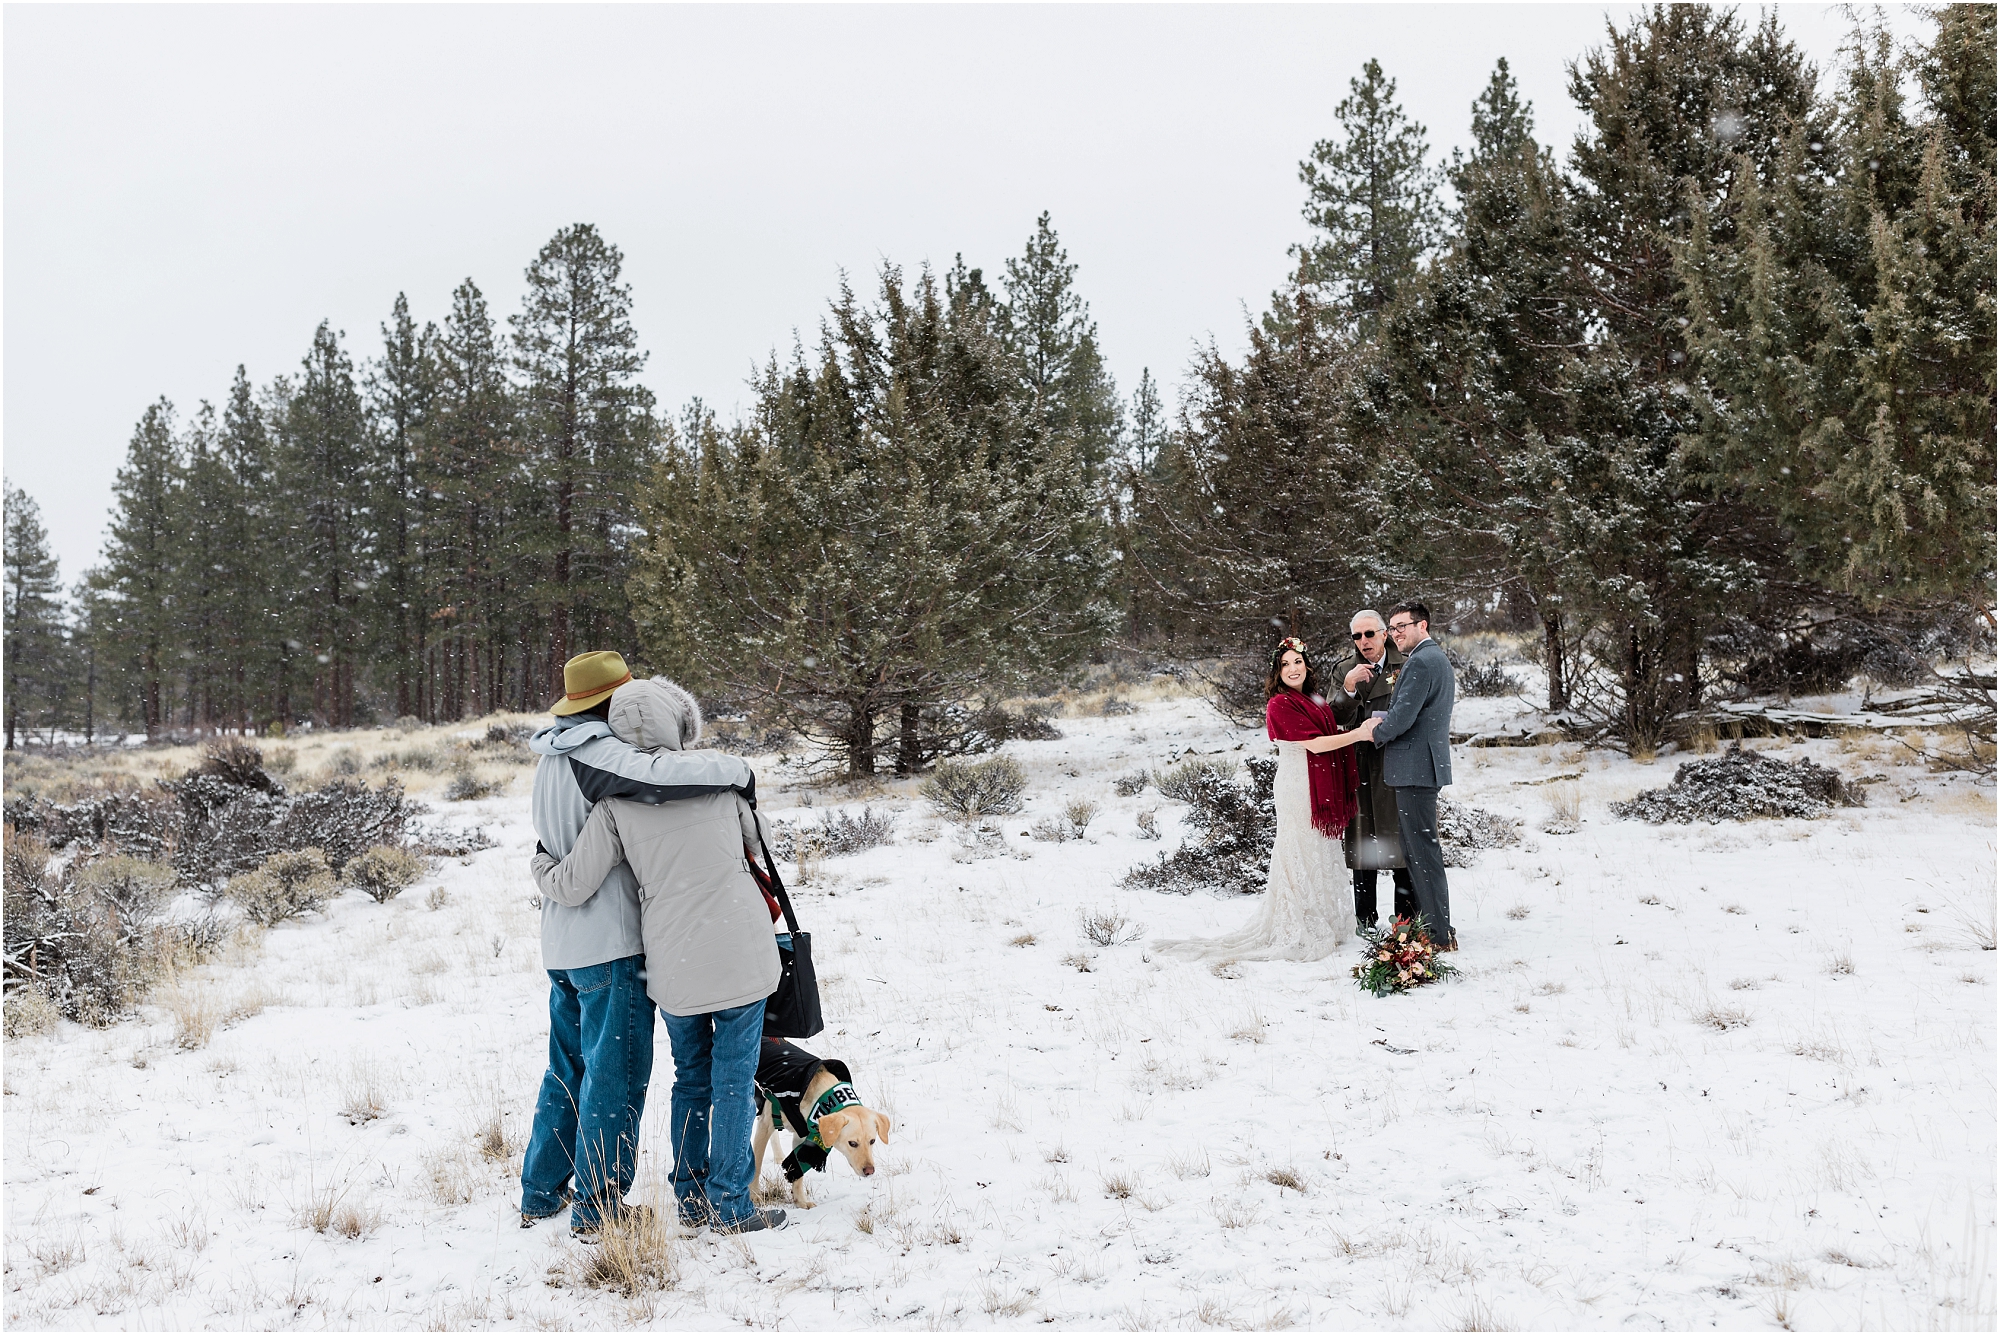 The bride's parents embrace as they watch their daughter's intimate Central Oregon winter elopement near Five Pine Lodge in Sisters, Oregon. | Erica Swantek Photography